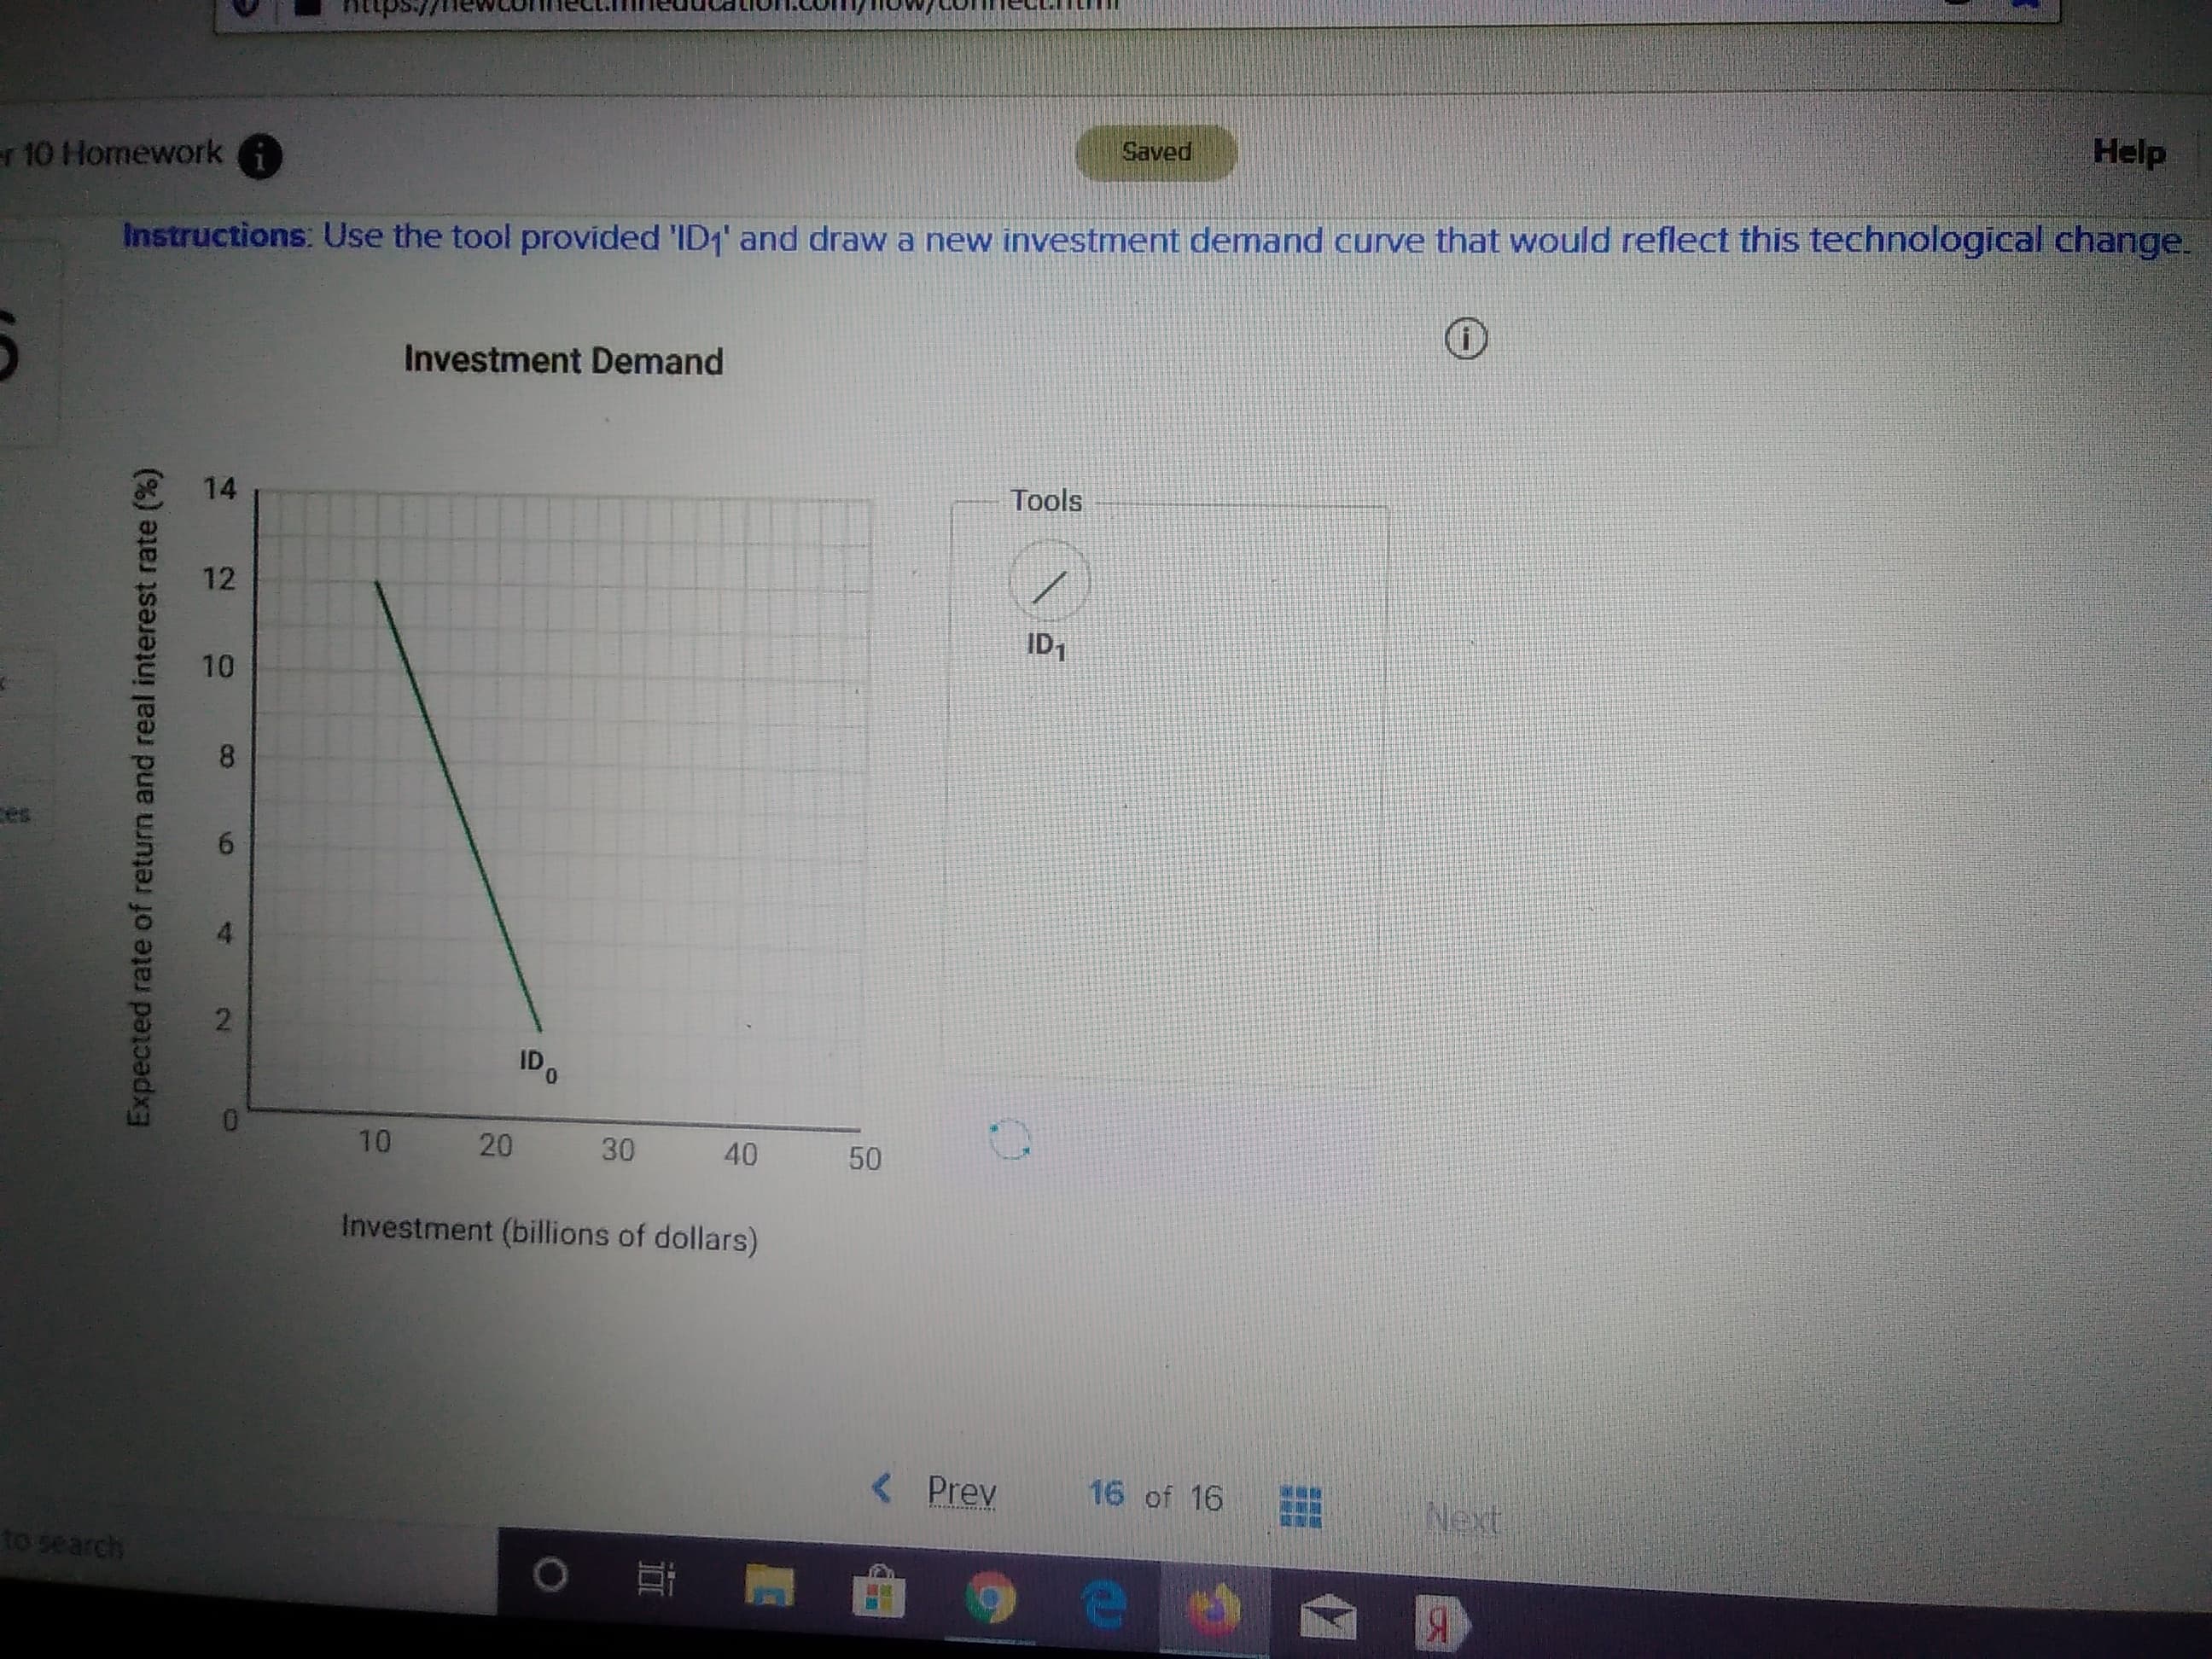 Help
Saved
r 10 Homework
Instructions: Use the tool provided 'ID1' and draw a new investment demand curve that would reflect this technological change
Investment Demand
Tools
14
12
ID1
8
es
2
IDO
20 30
10
40
50
Investment (billions of dollars)
16 of 16
< Prev
Next
to search
Я
SEE
10
NO
Expected rate of return and real interest rate (%)
